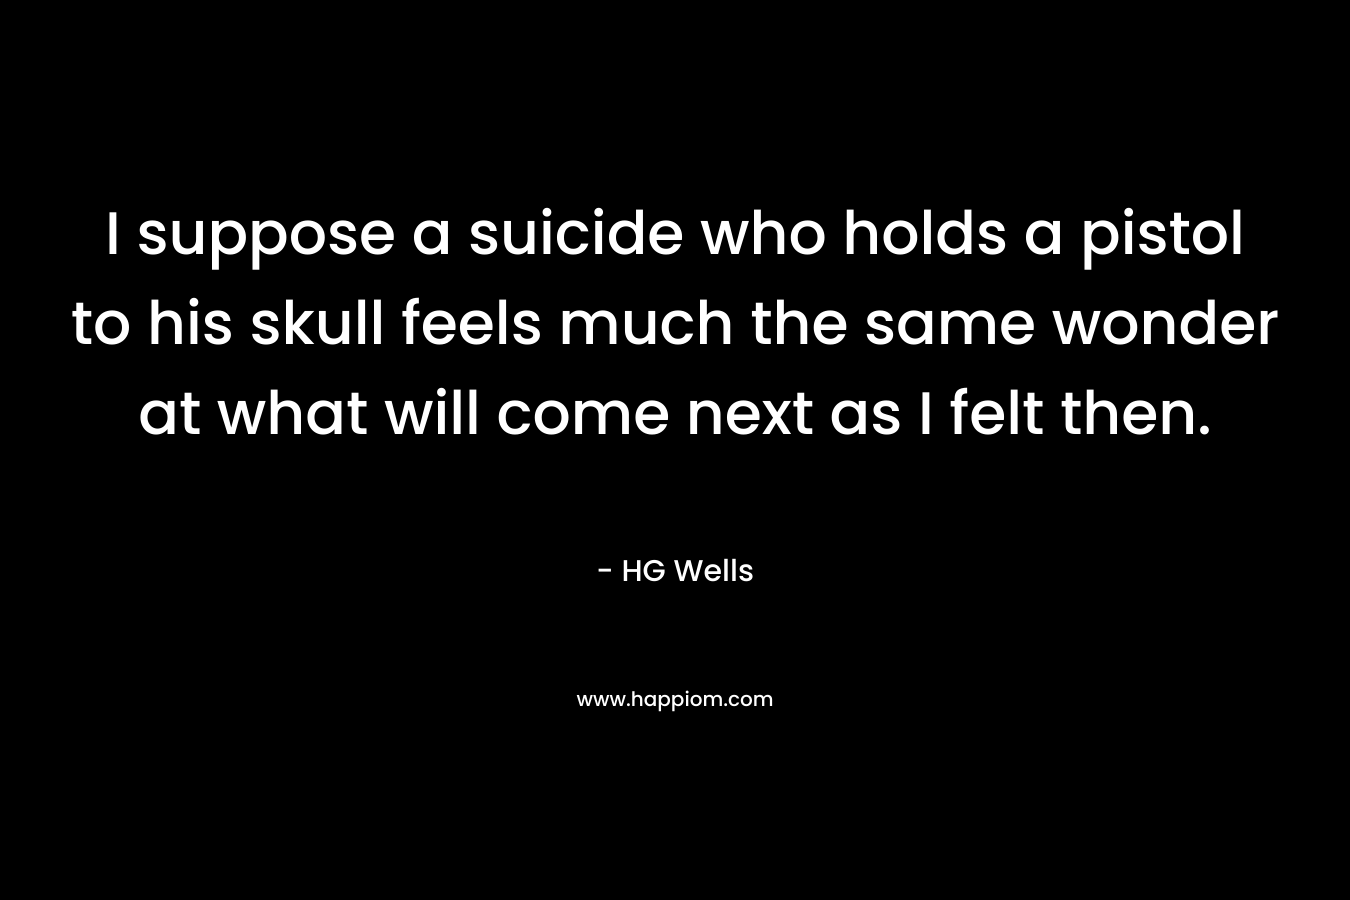 I suppose a suicide who holds a pistol to his skull feels much the same wonder at what will come next as I felt then.